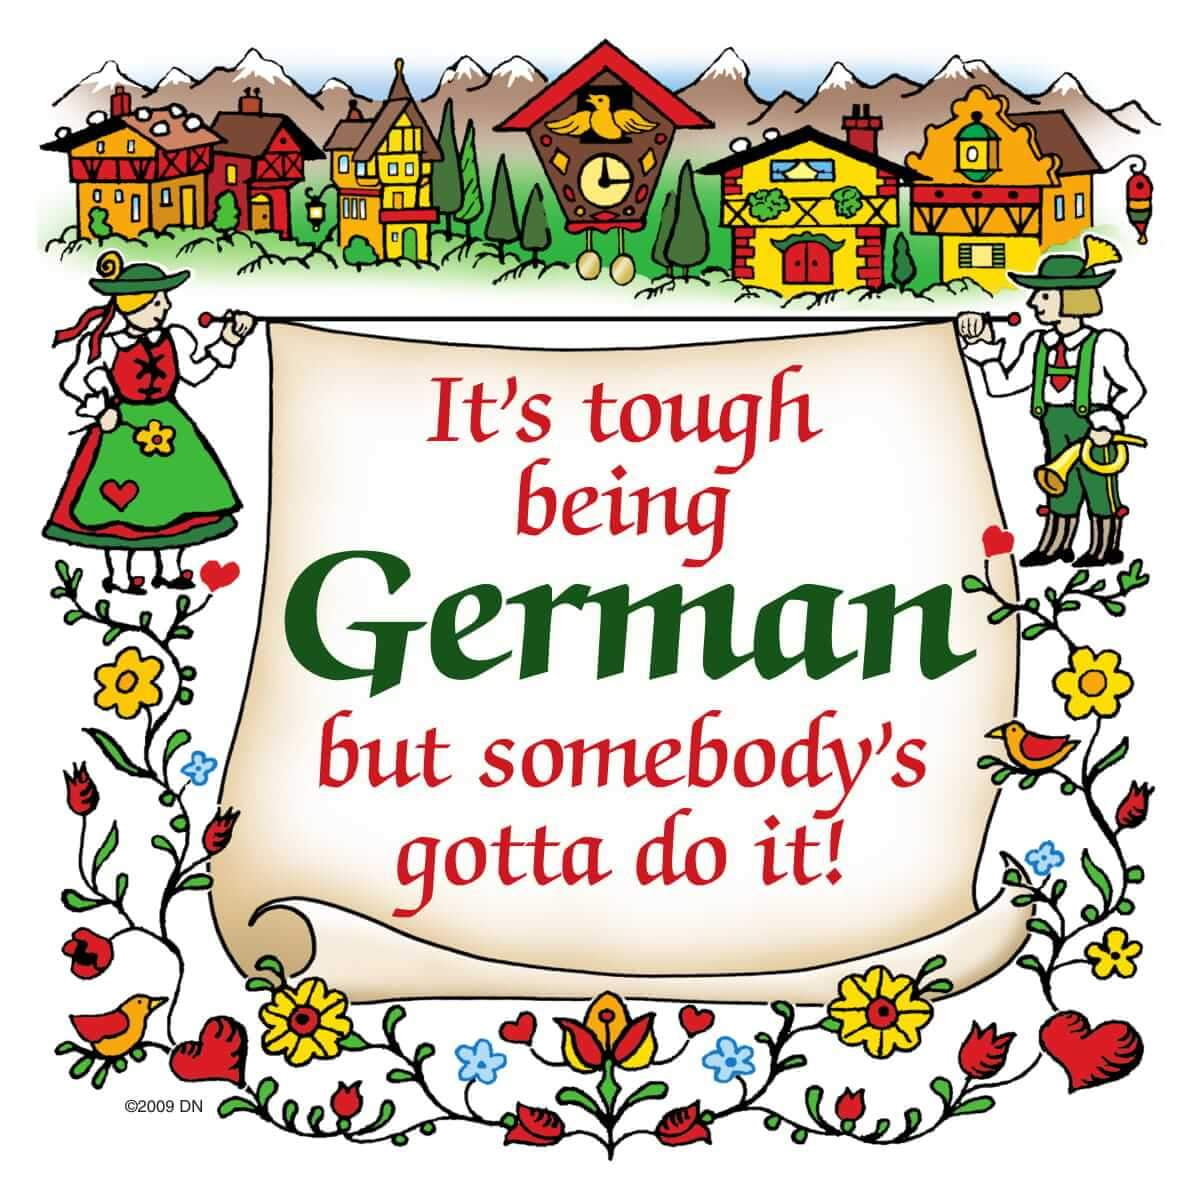 Details about   NEW!German,Germany,It's Tough Being German,But somebody's...,6"x6" Ceramic Tile 